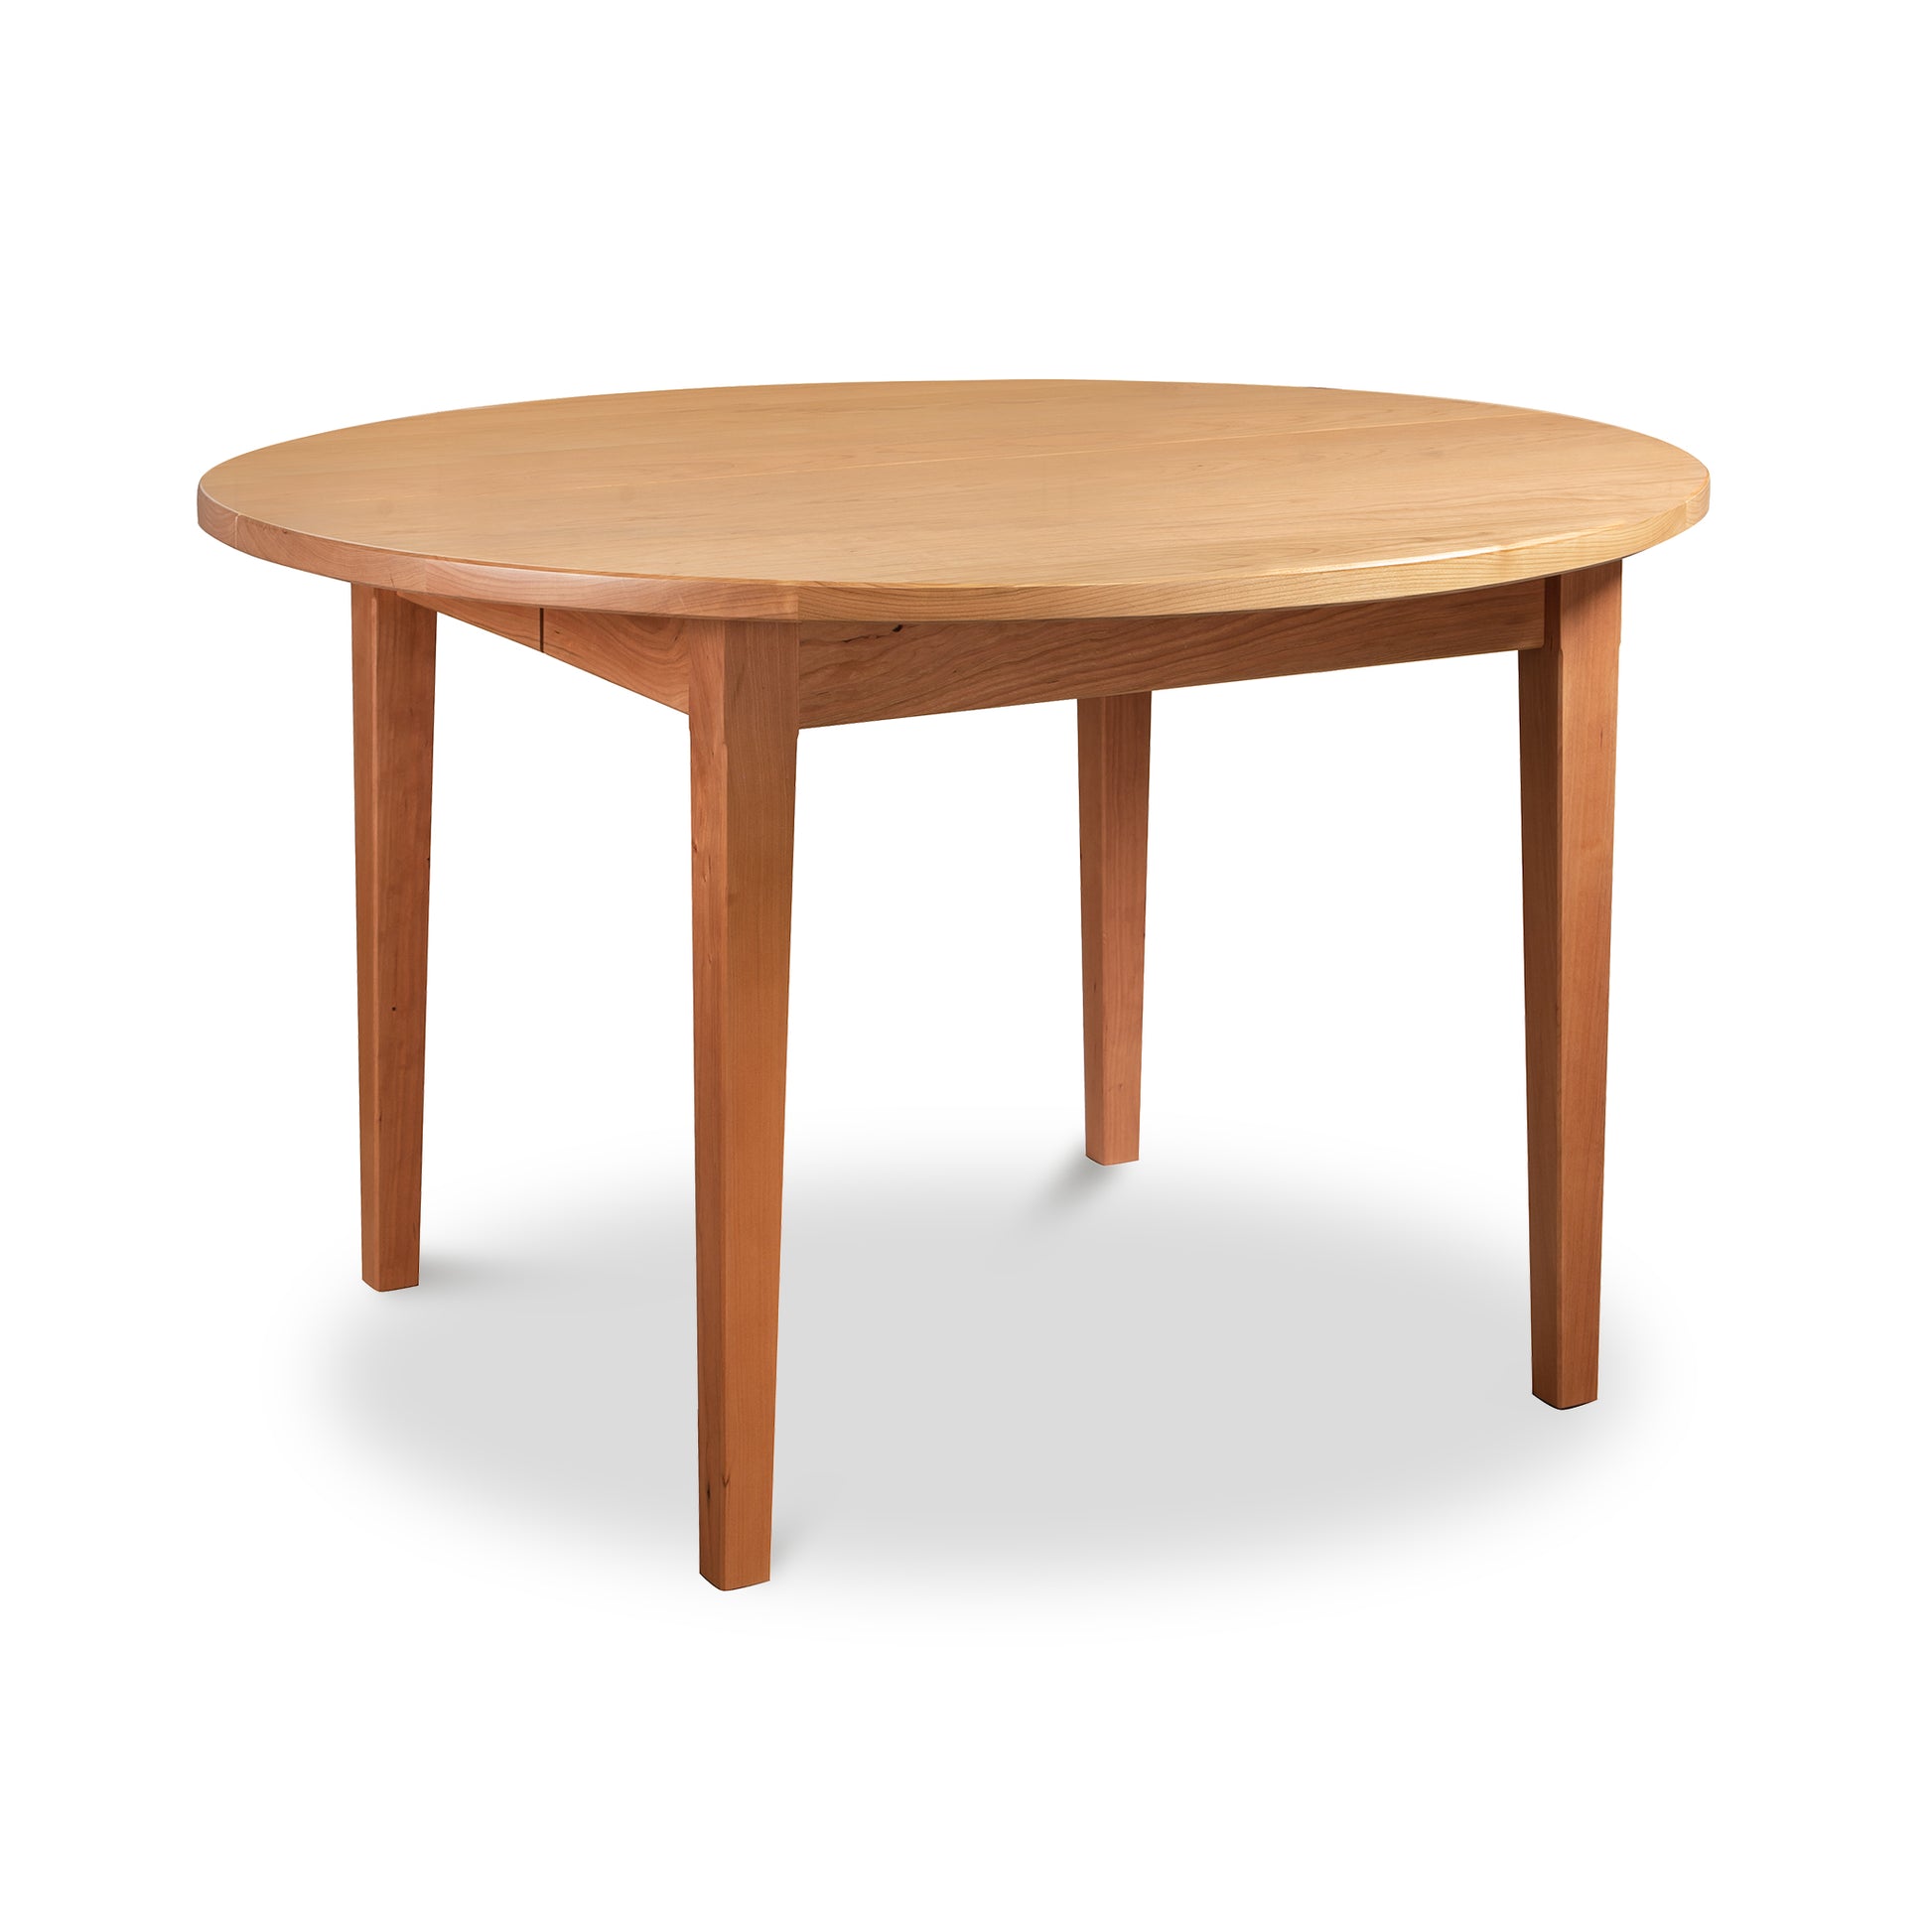 A Vermont Shaker Round Extension Table from Maple Corner Woodworks, with four legs, isolated on a white background. The table has a smooth finish and natural cherry wood texture.